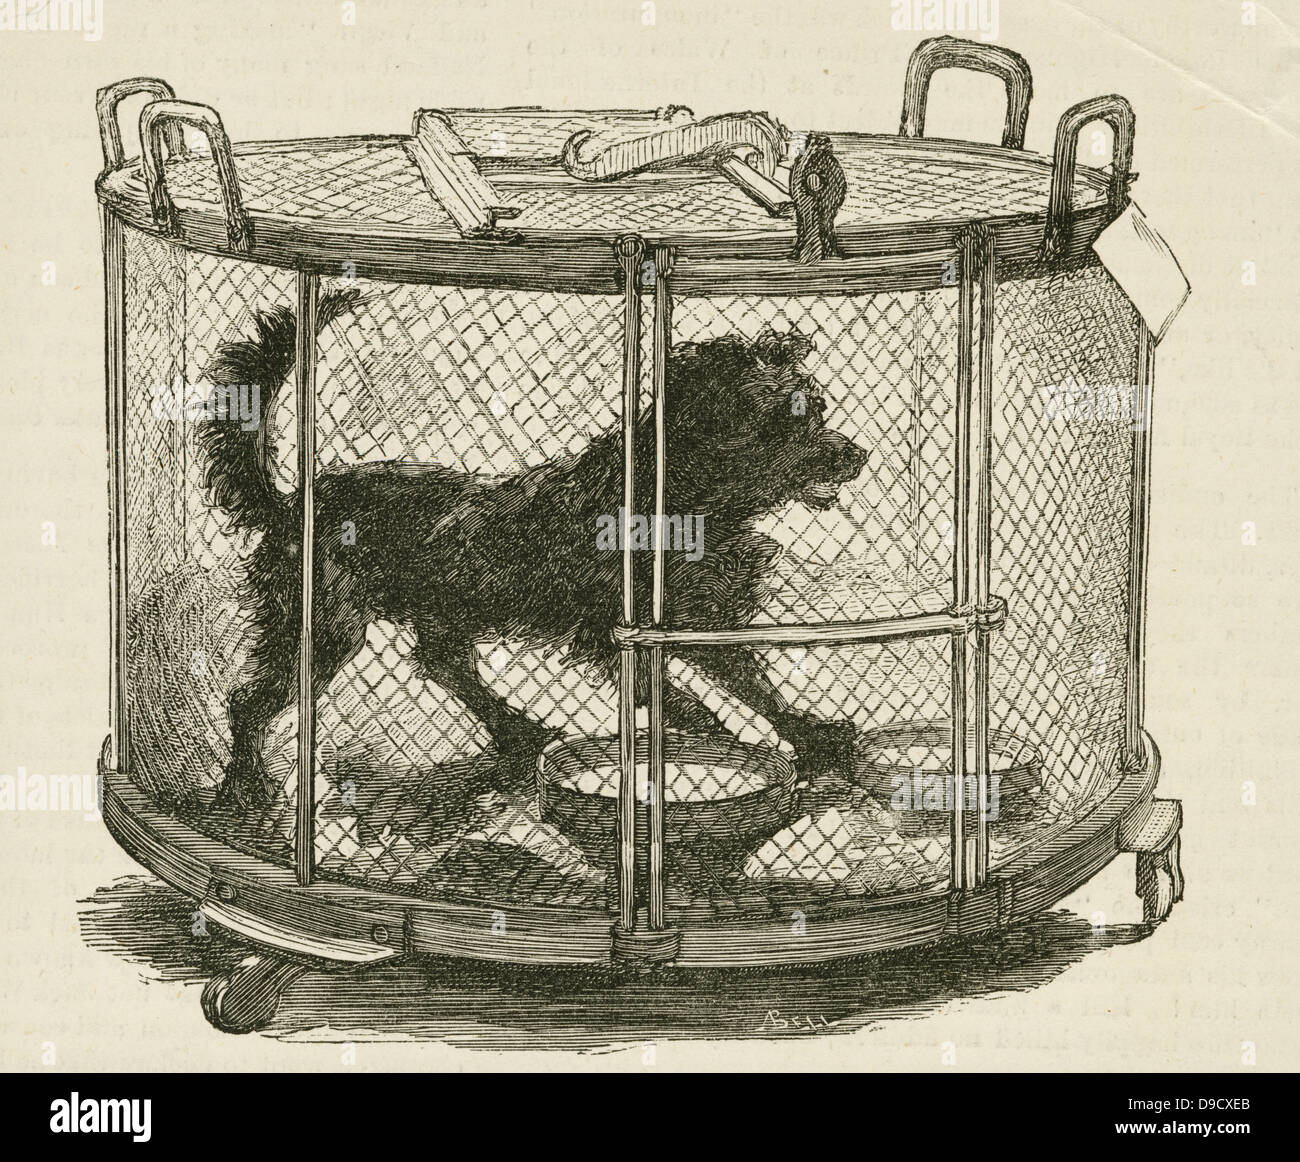 Cage containing inoculated used by Louis Pasteur (1822-1895) during his work on Hydrophobia (Rabies)  at the Ecole Normale, Paris.  Engraving, London, 1885. Stock Photo